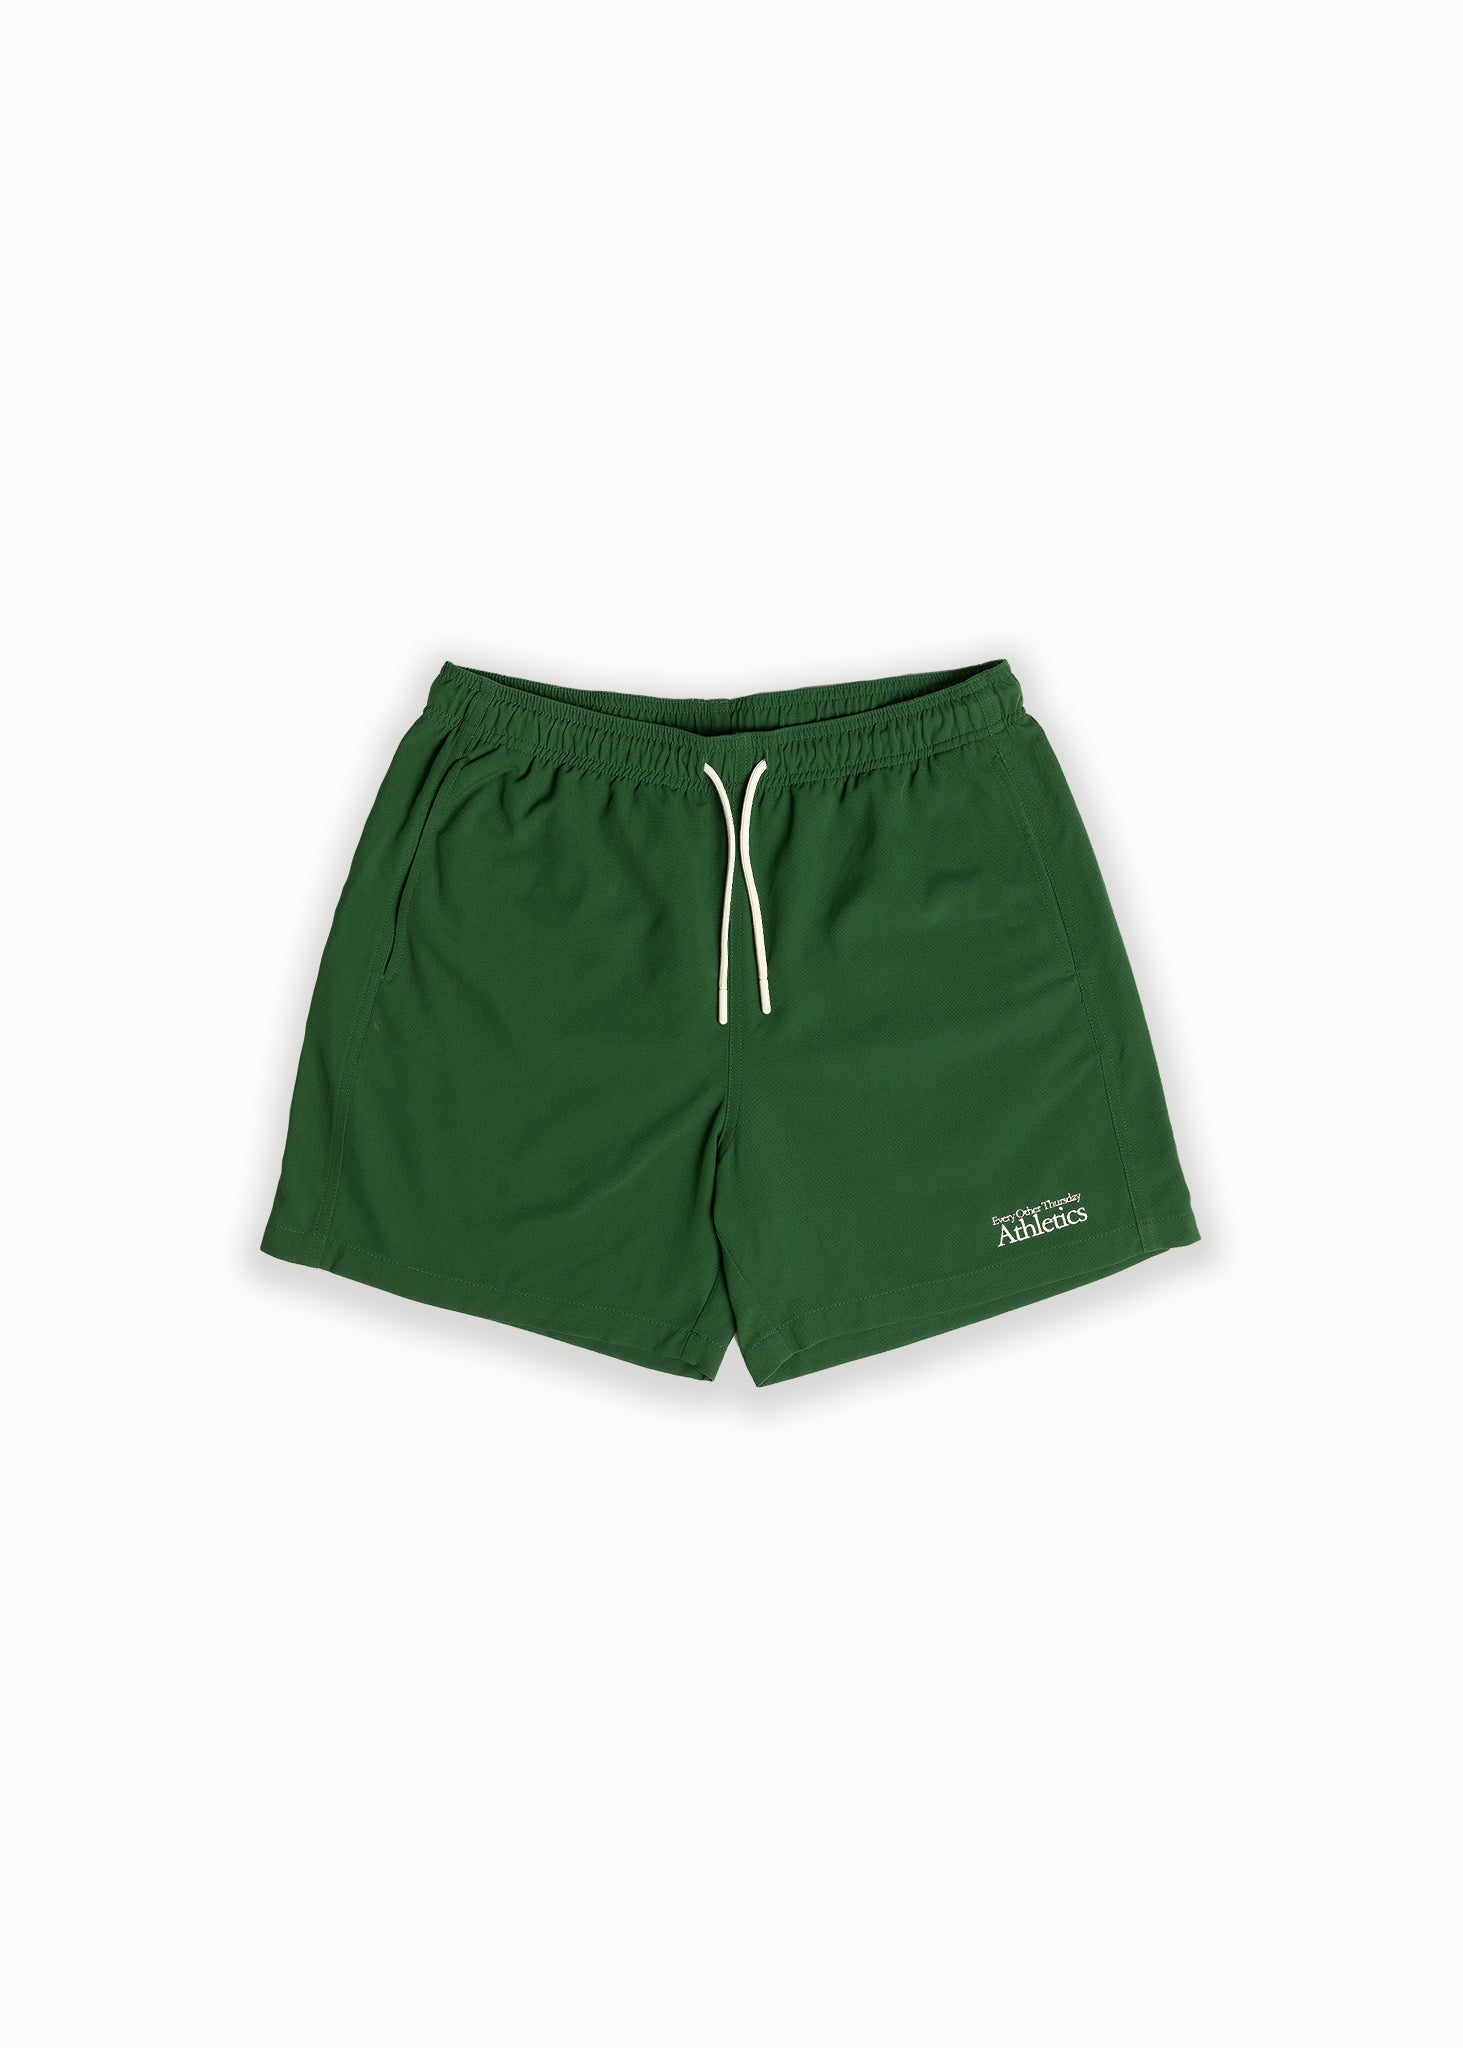 Mid-weight Nylon Shorts – Every Other Thursday